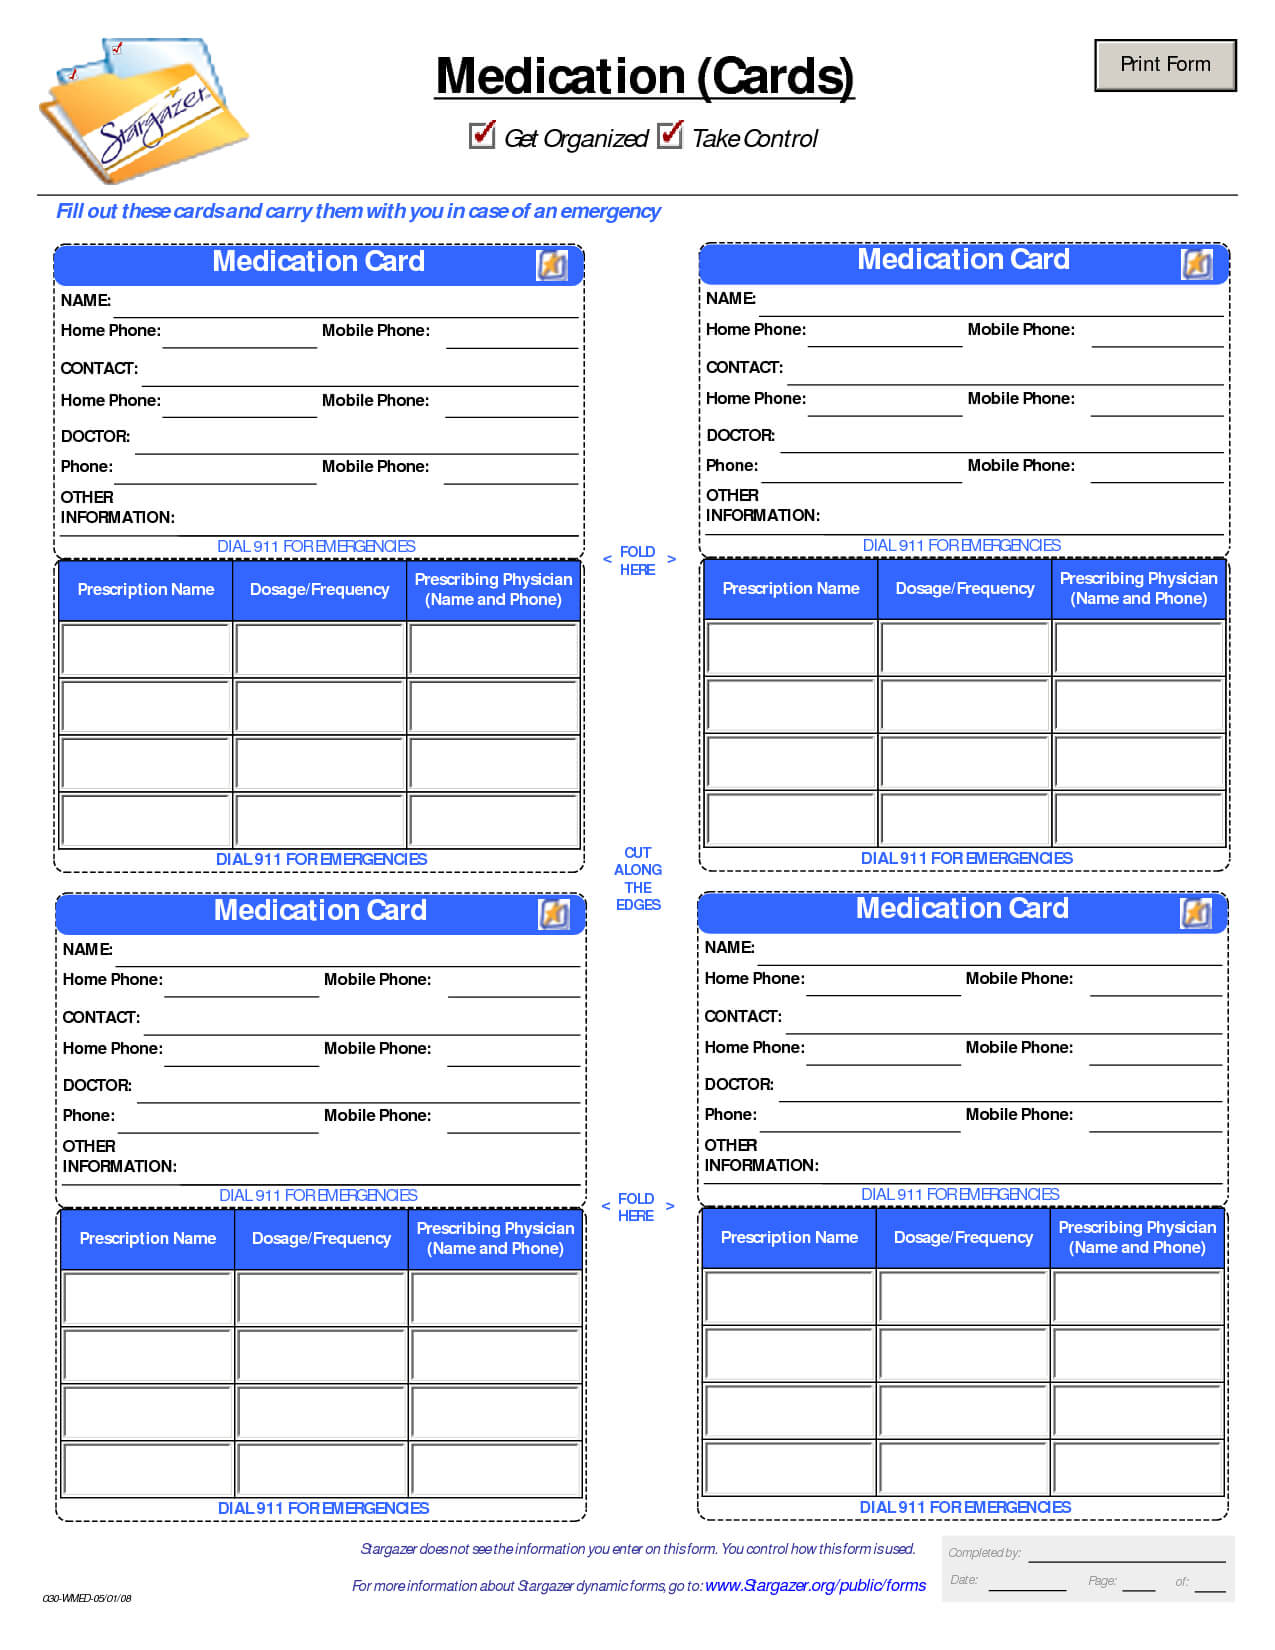 medication-templates-calep-midnightpig-co-within-pharmacology-drug-card-template